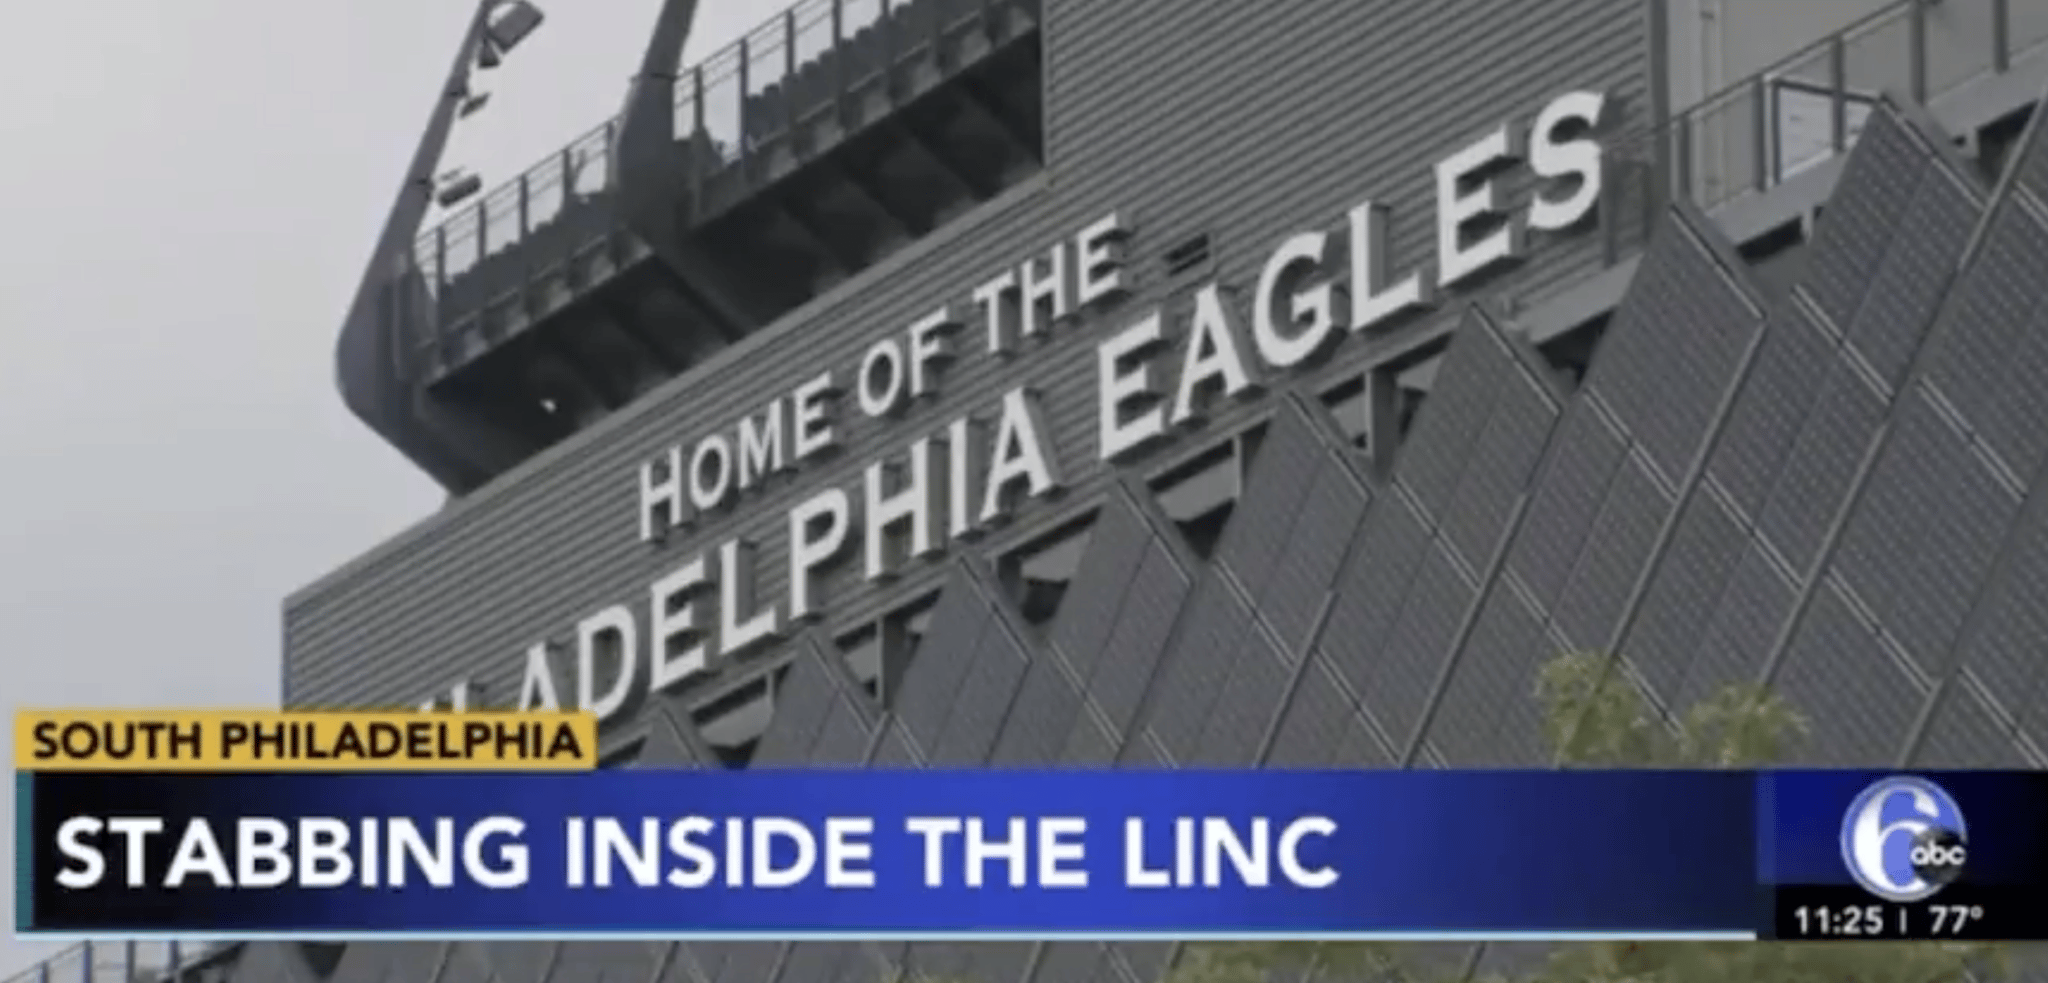 Someone was Stabbed at the Linc During a Charity Event